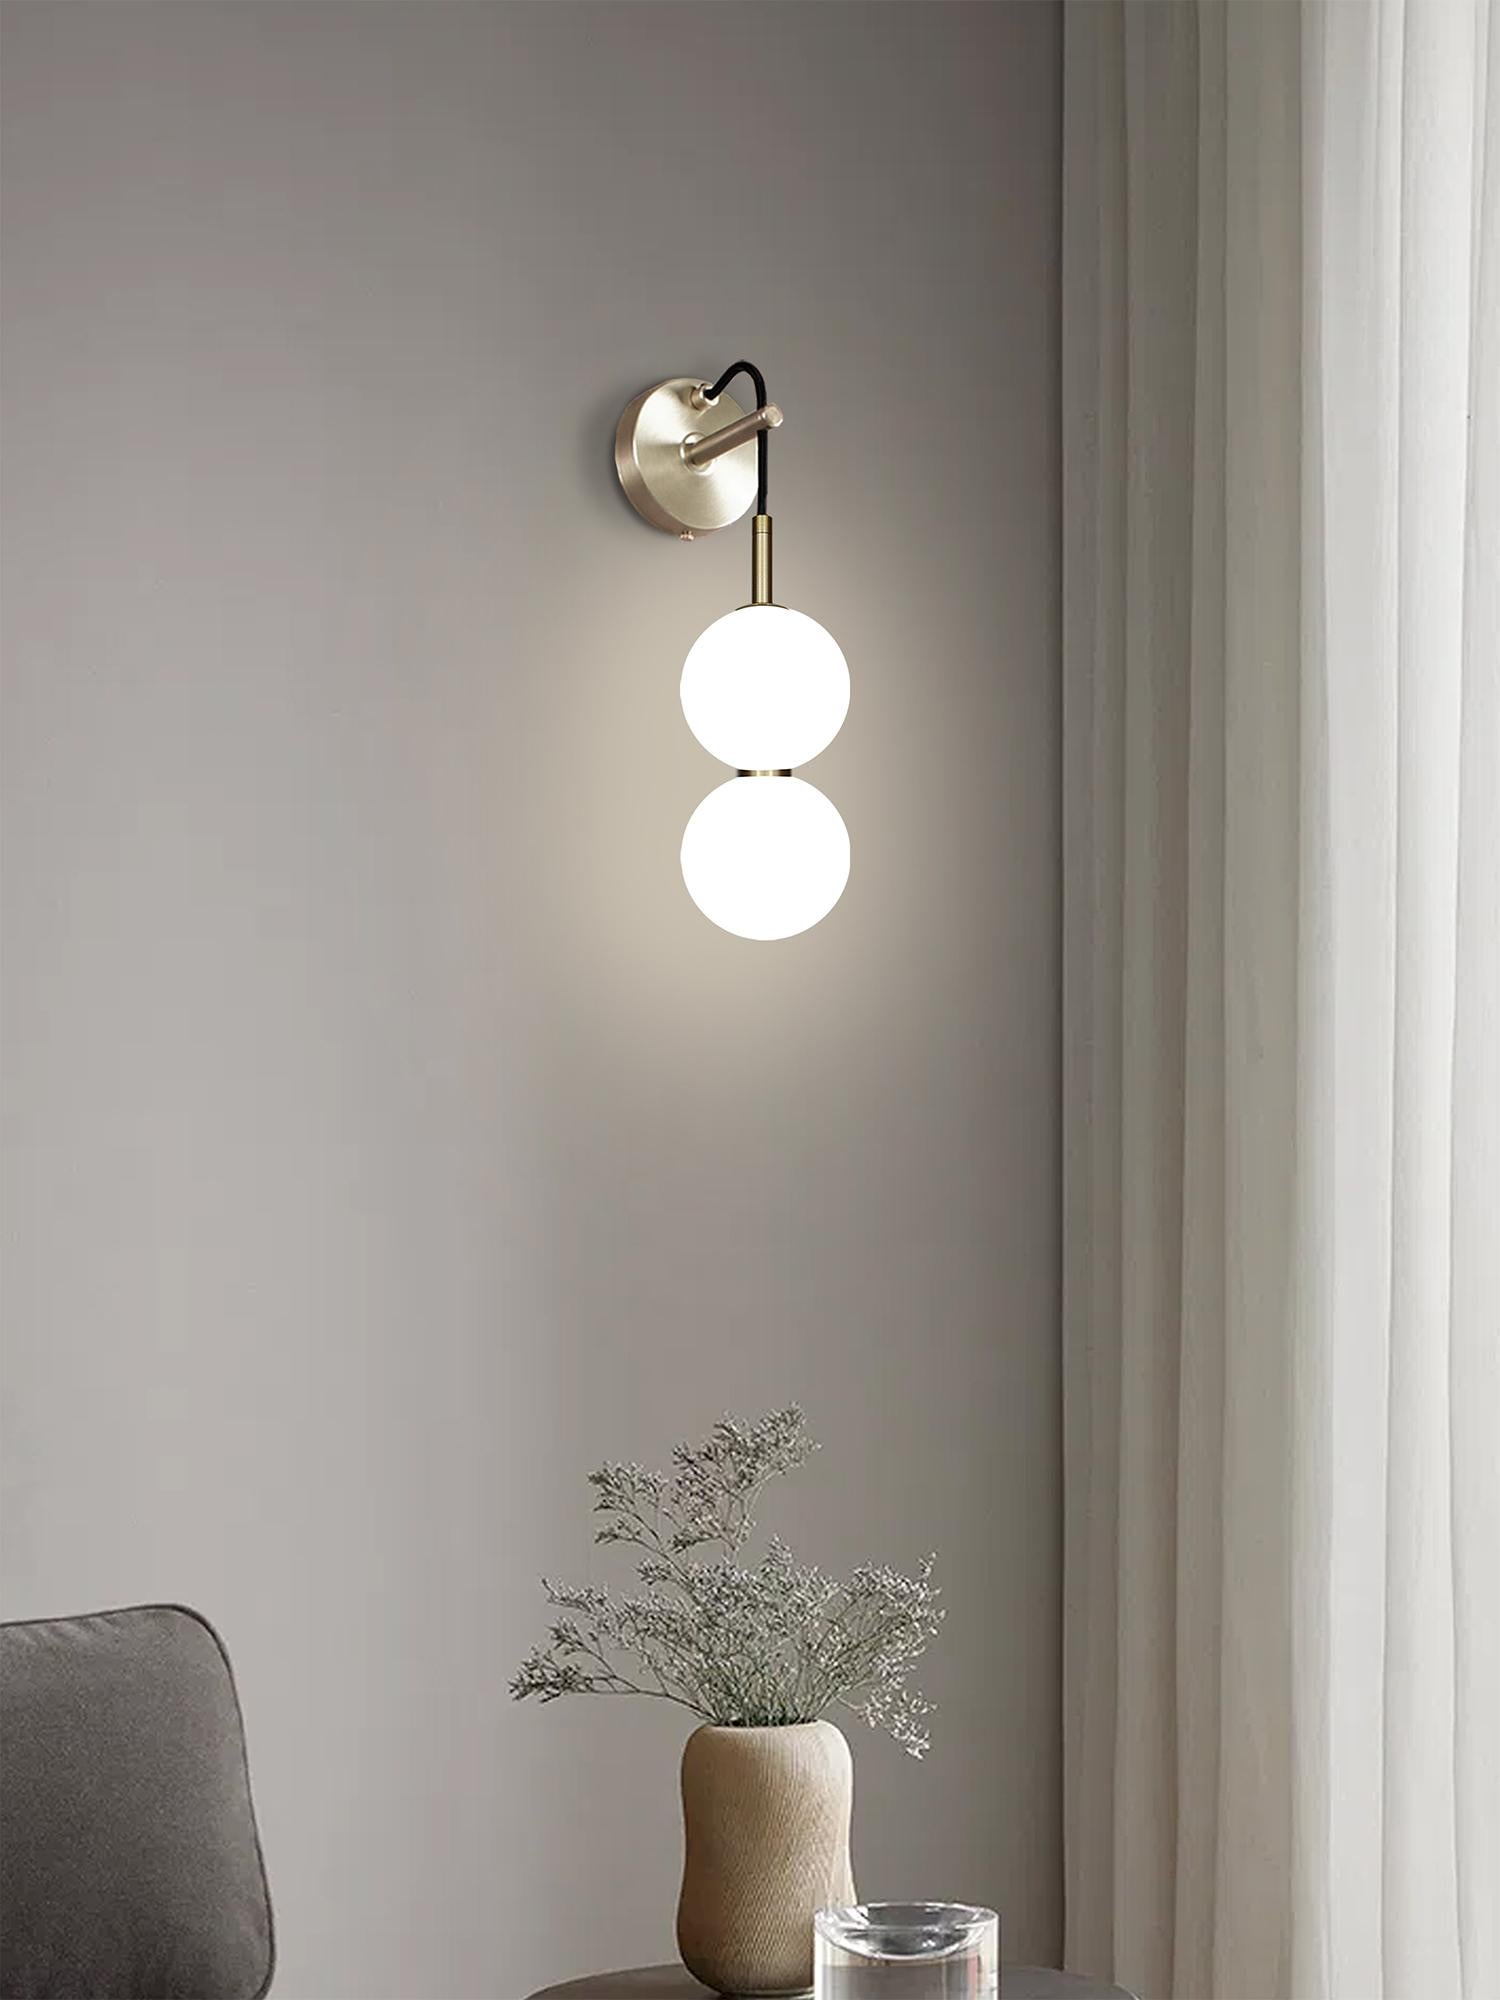 Two delicate white opaline glass orbs stacked on top of one another to create an echoed glow of light and the illusion of subtle reflections.